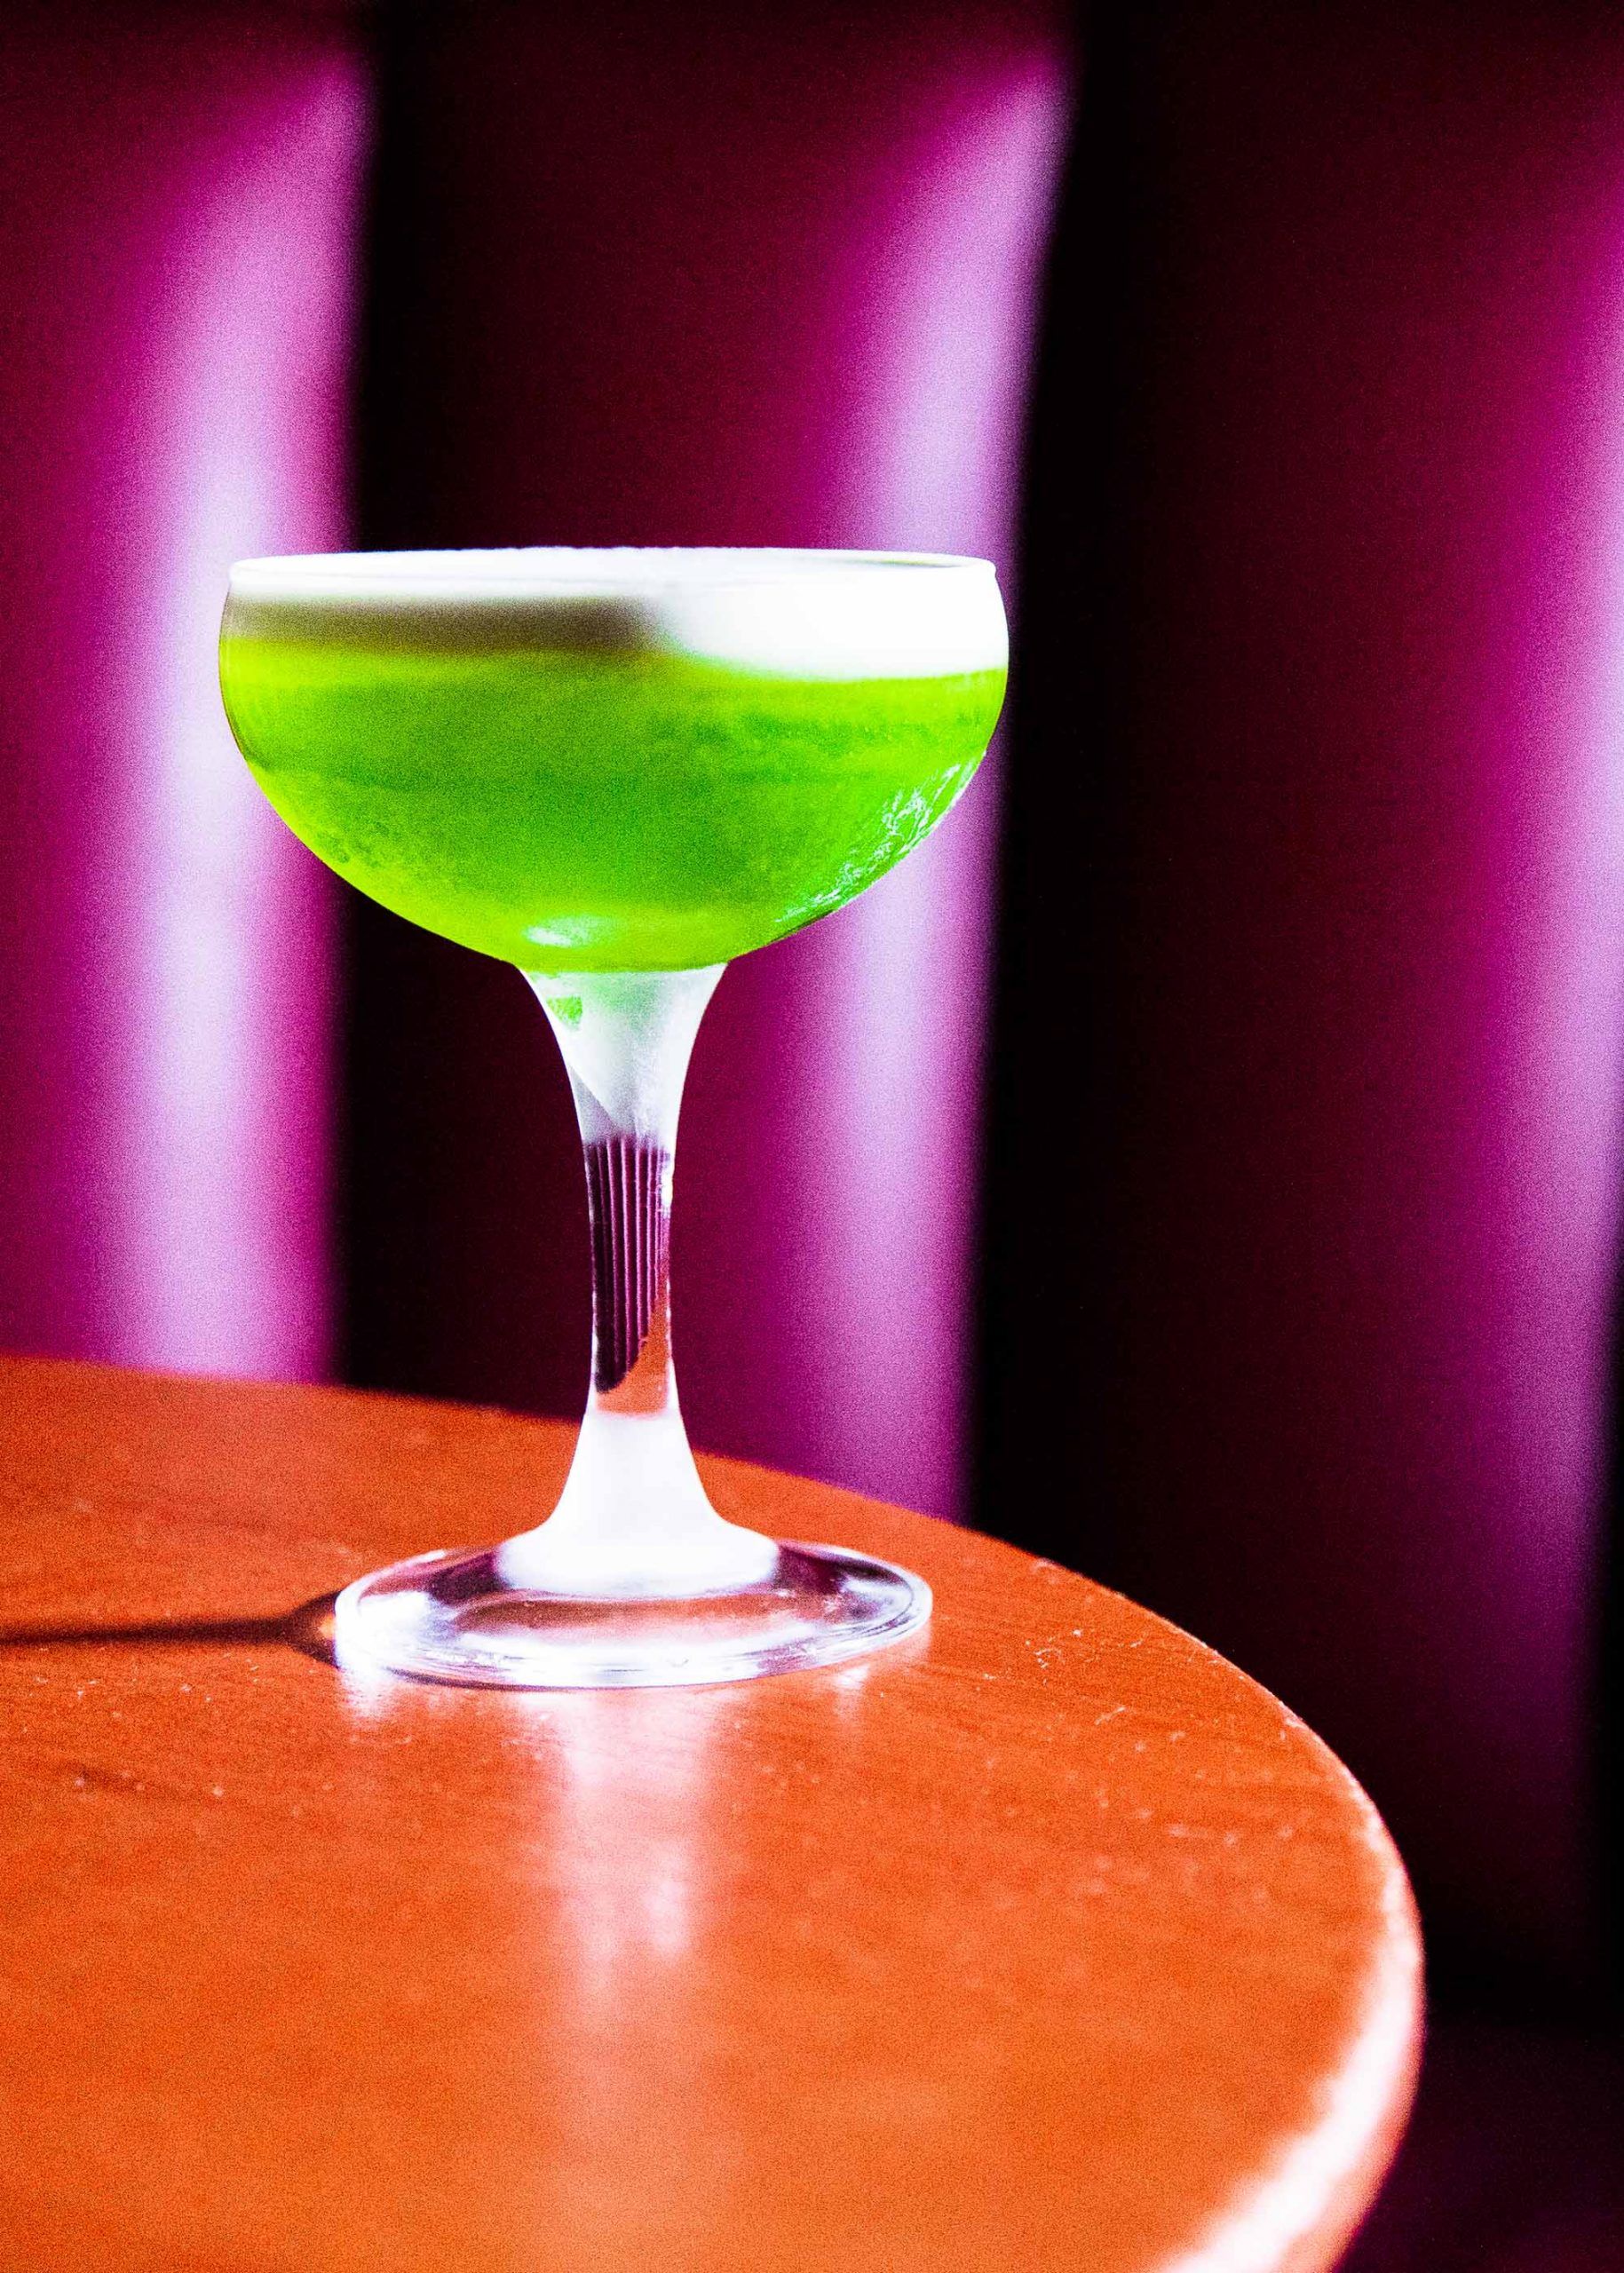 Matcha tea plays a starring role for this bourbon sipper